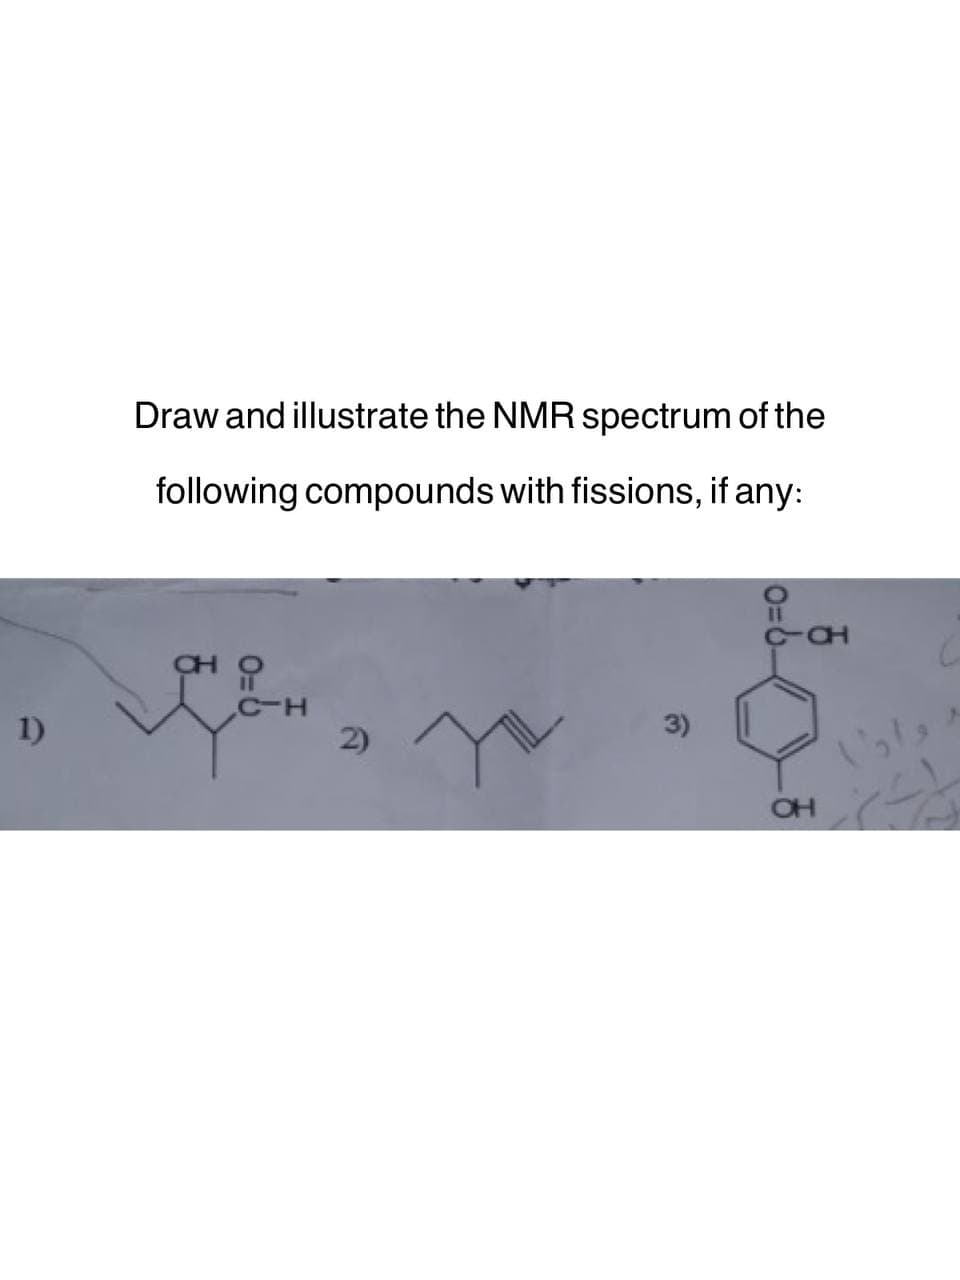 1)
Draw and illustrate the NMR spectrum of the
following compounds with fissions, if any:
CH
유
C-H
2)
Y
3)
11
-CH
OH
وار)
C
25